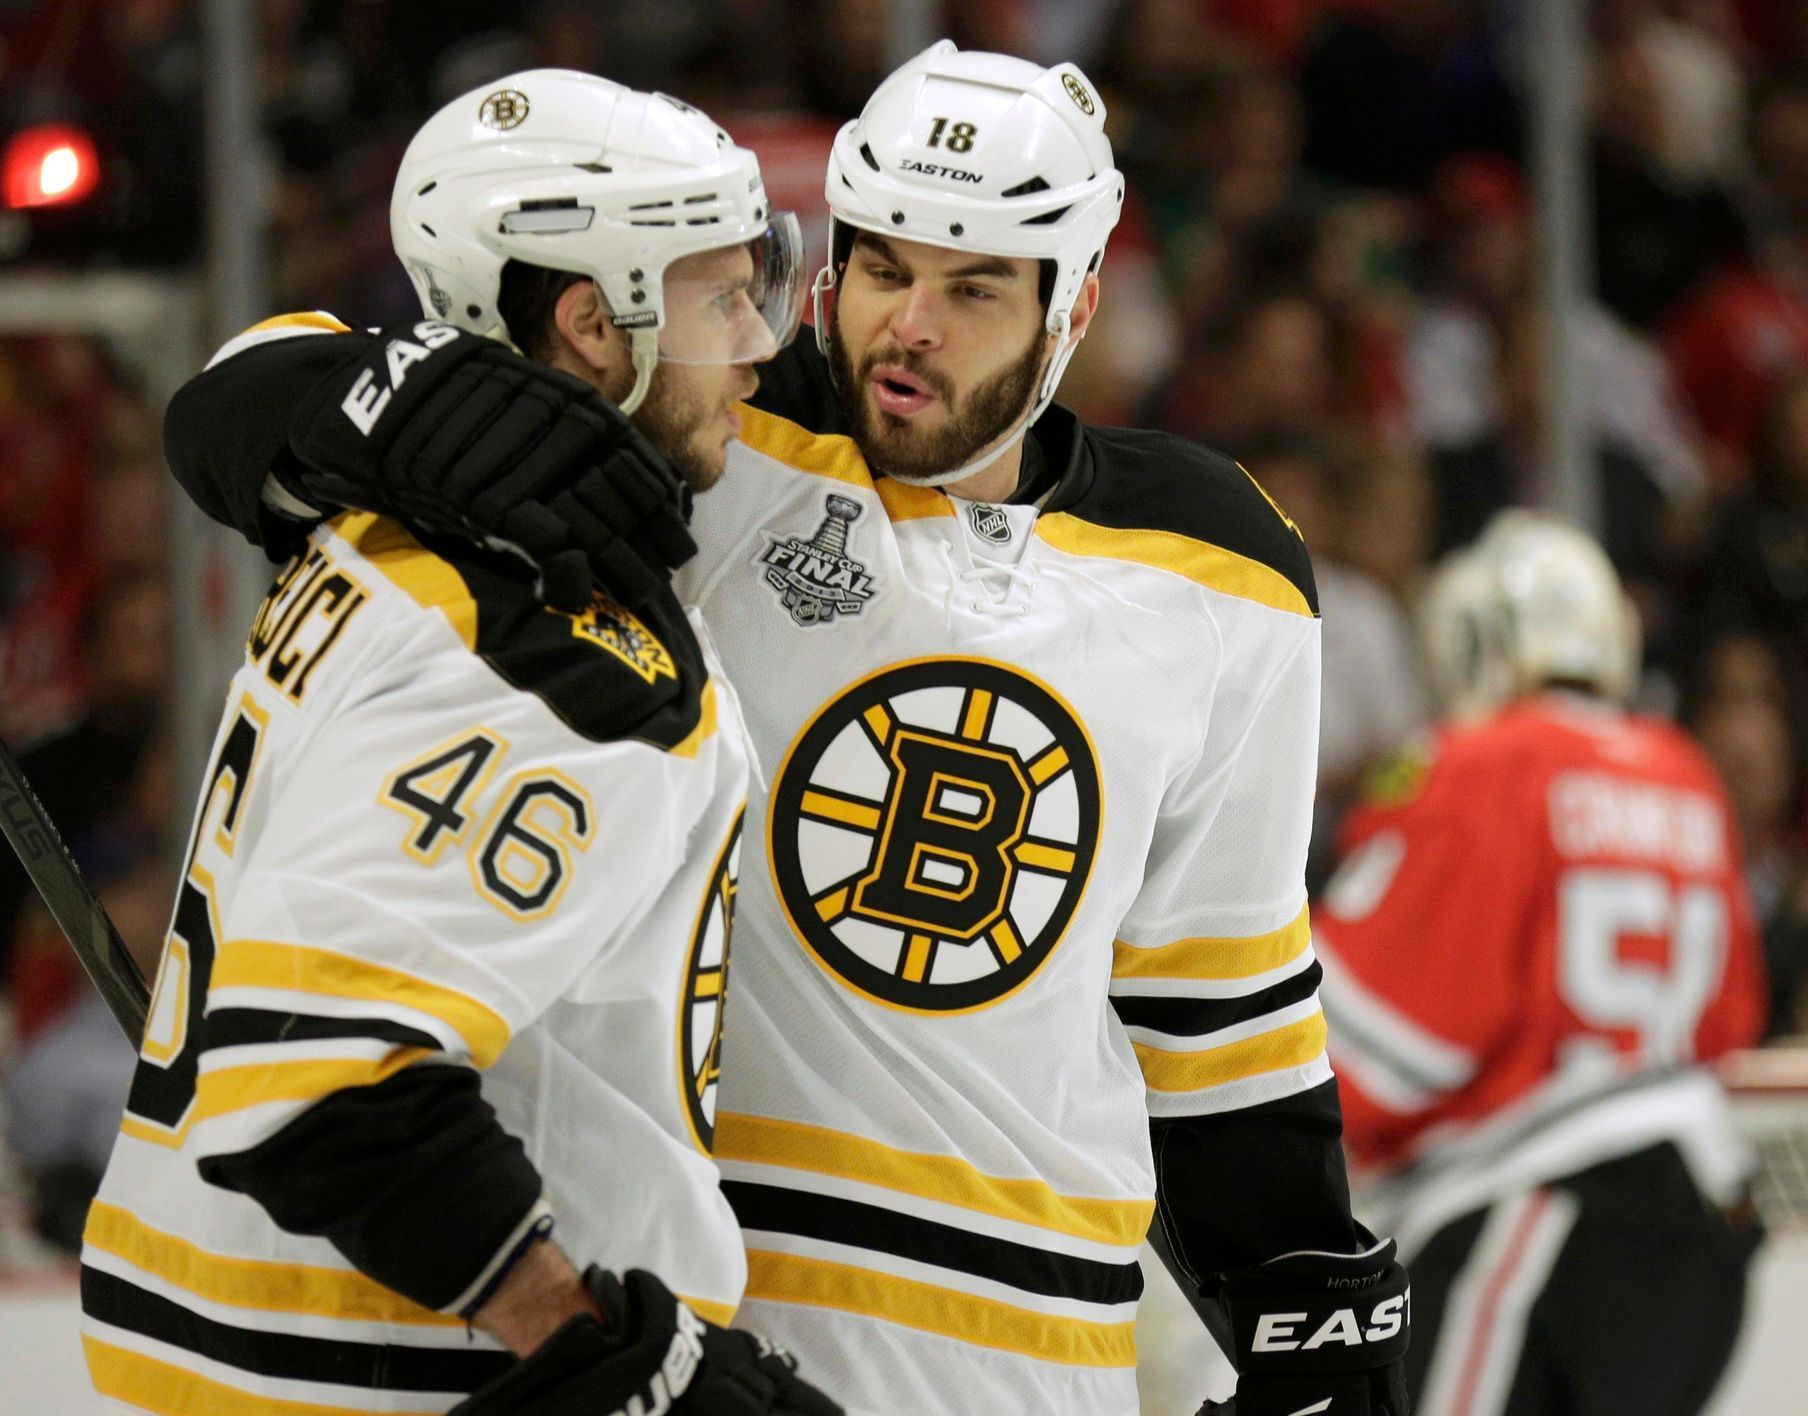 Bruins Krejci and Horton celebrate assisting on Lucic's firs